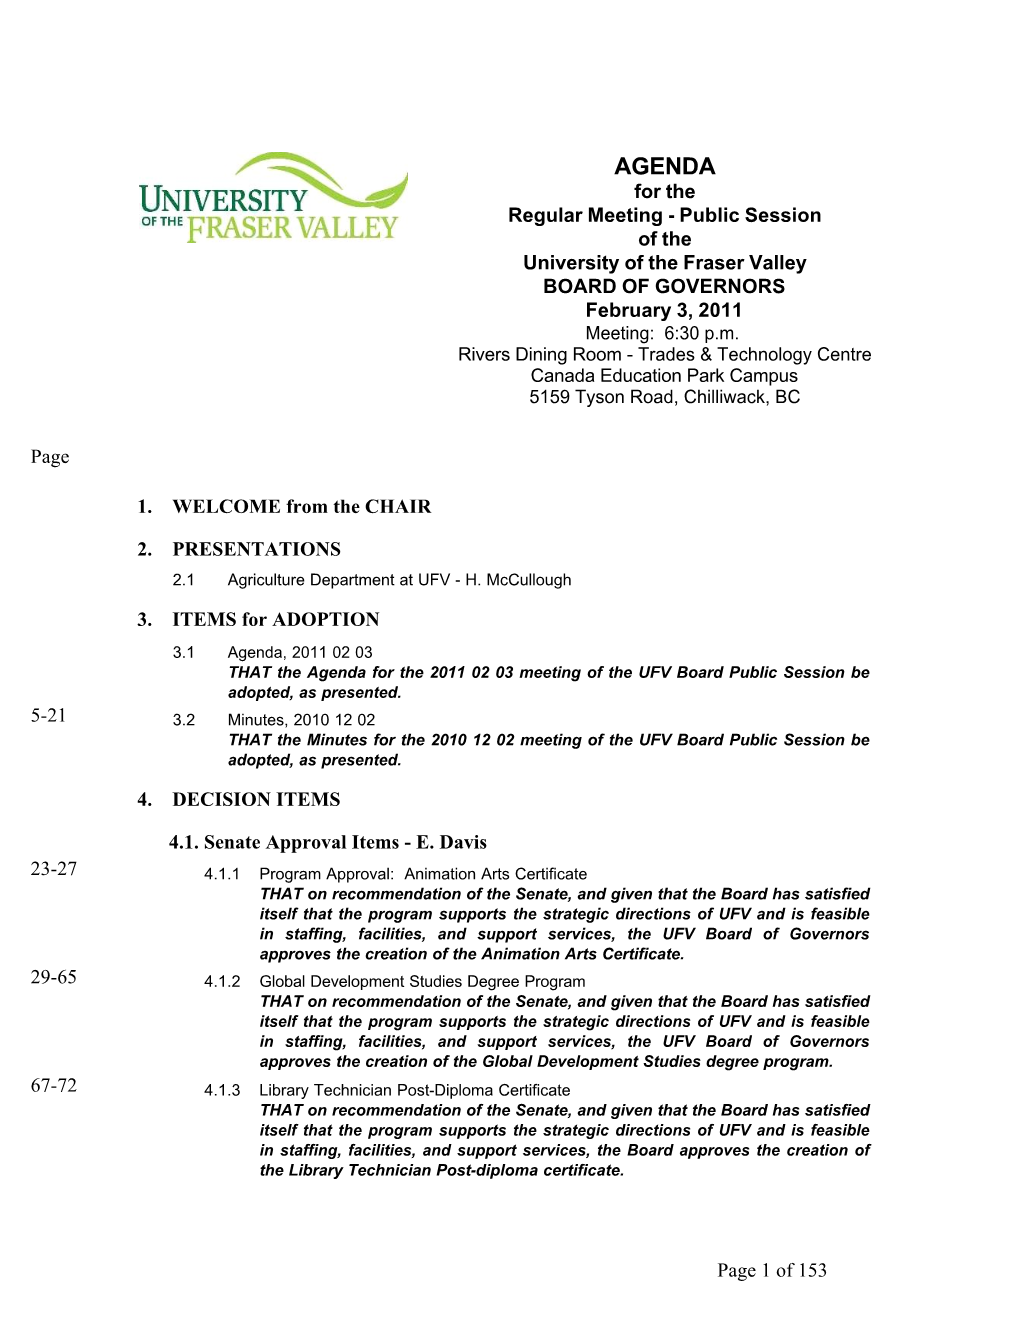 AGENDA for the Regular Meeting - Public Session of the University of the Fraser Valley BOARD of GOVERNORS February 3, 2011 Meeting: 6:30 P.M